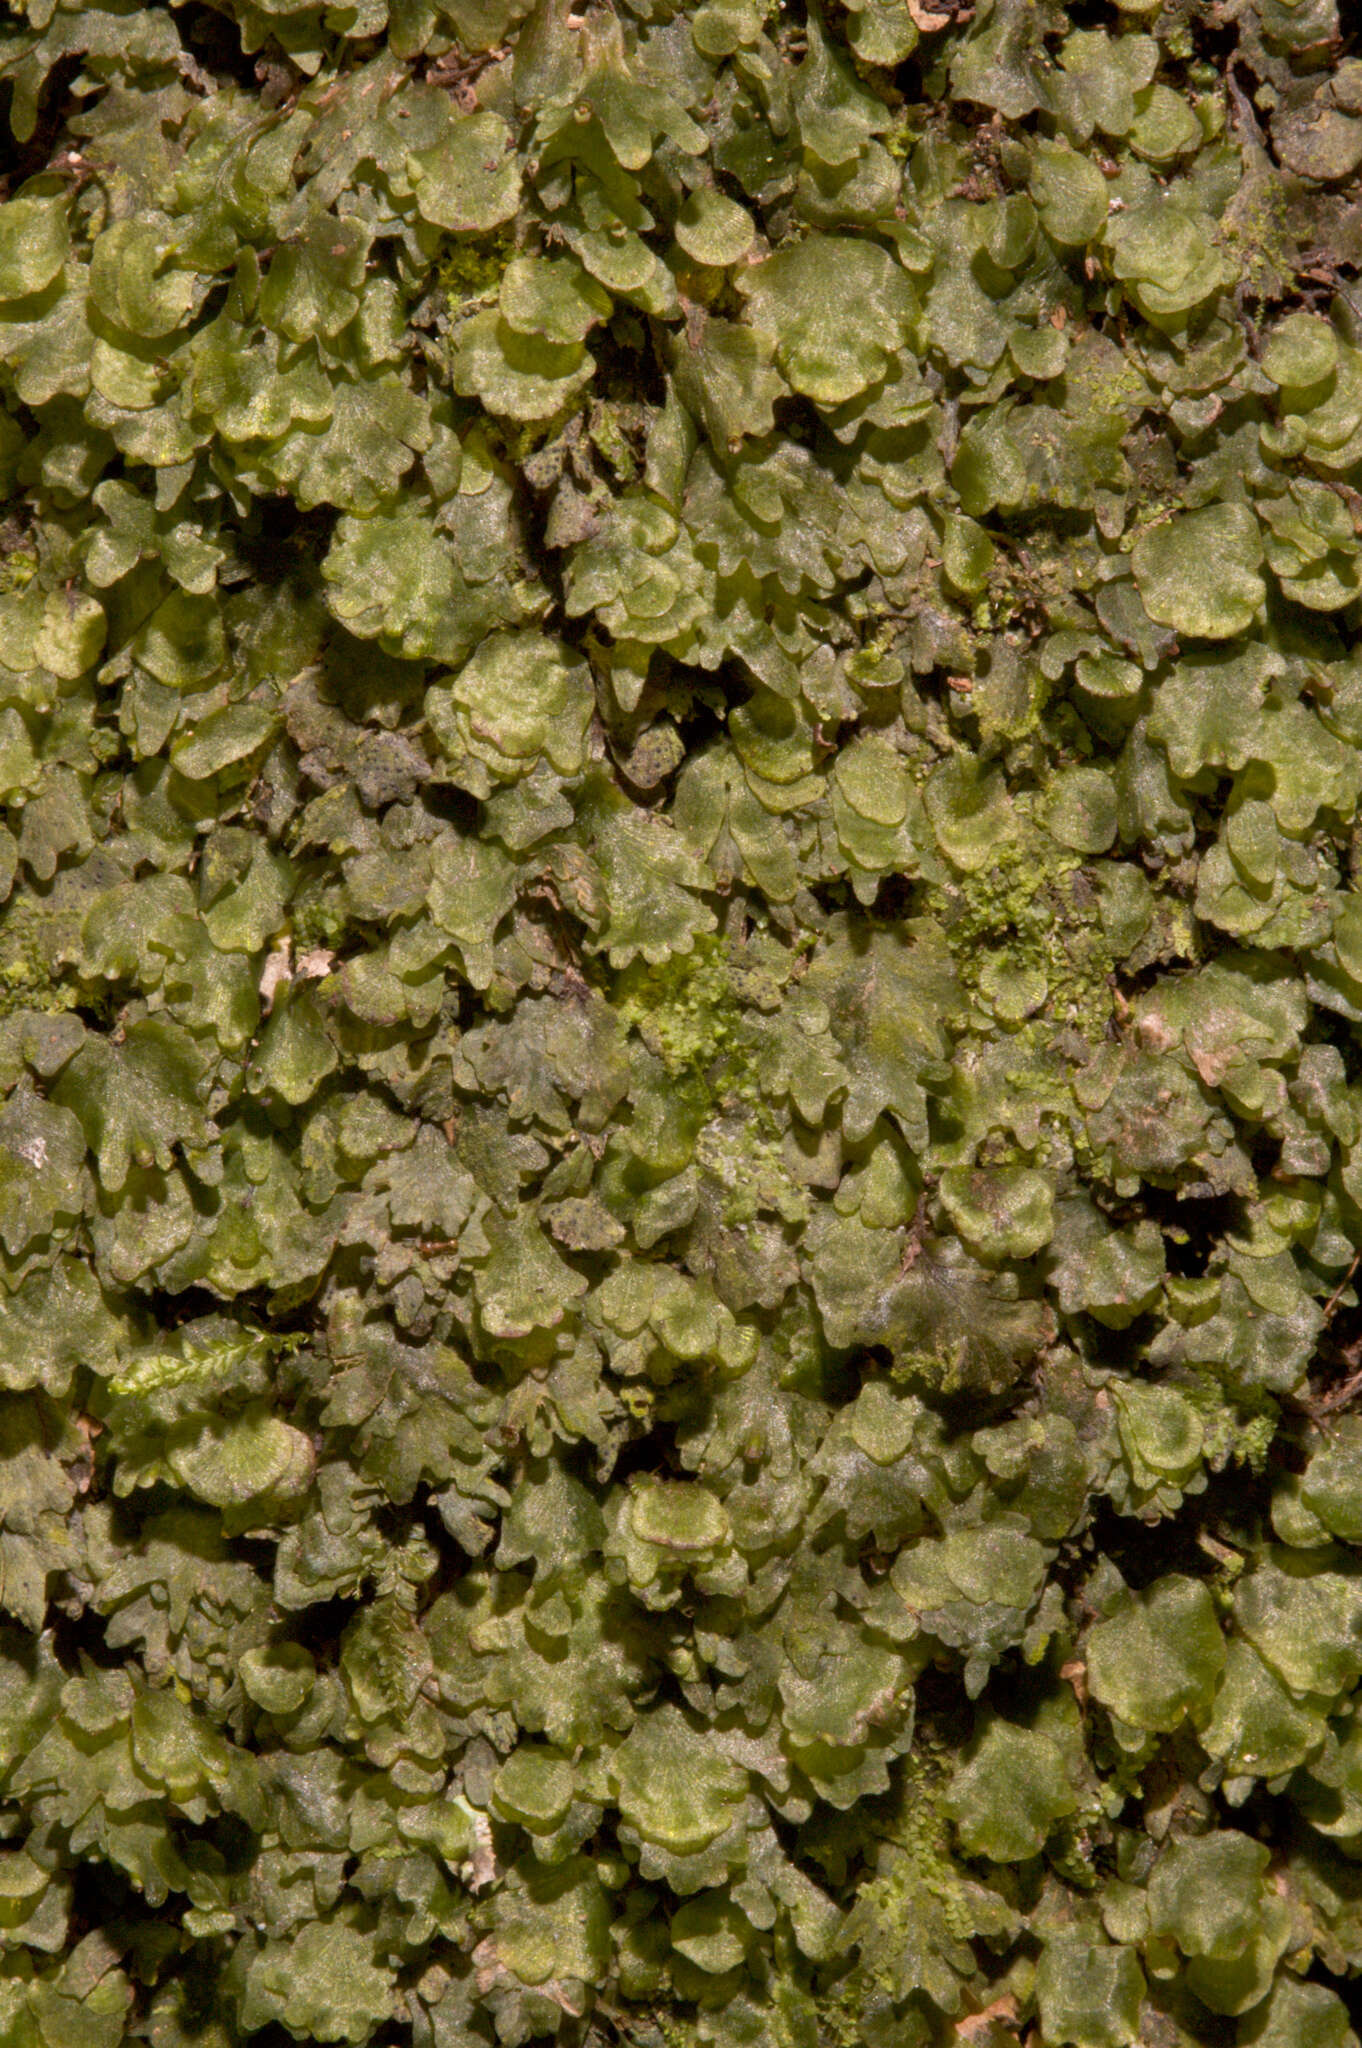 Image of dotted bristle fern